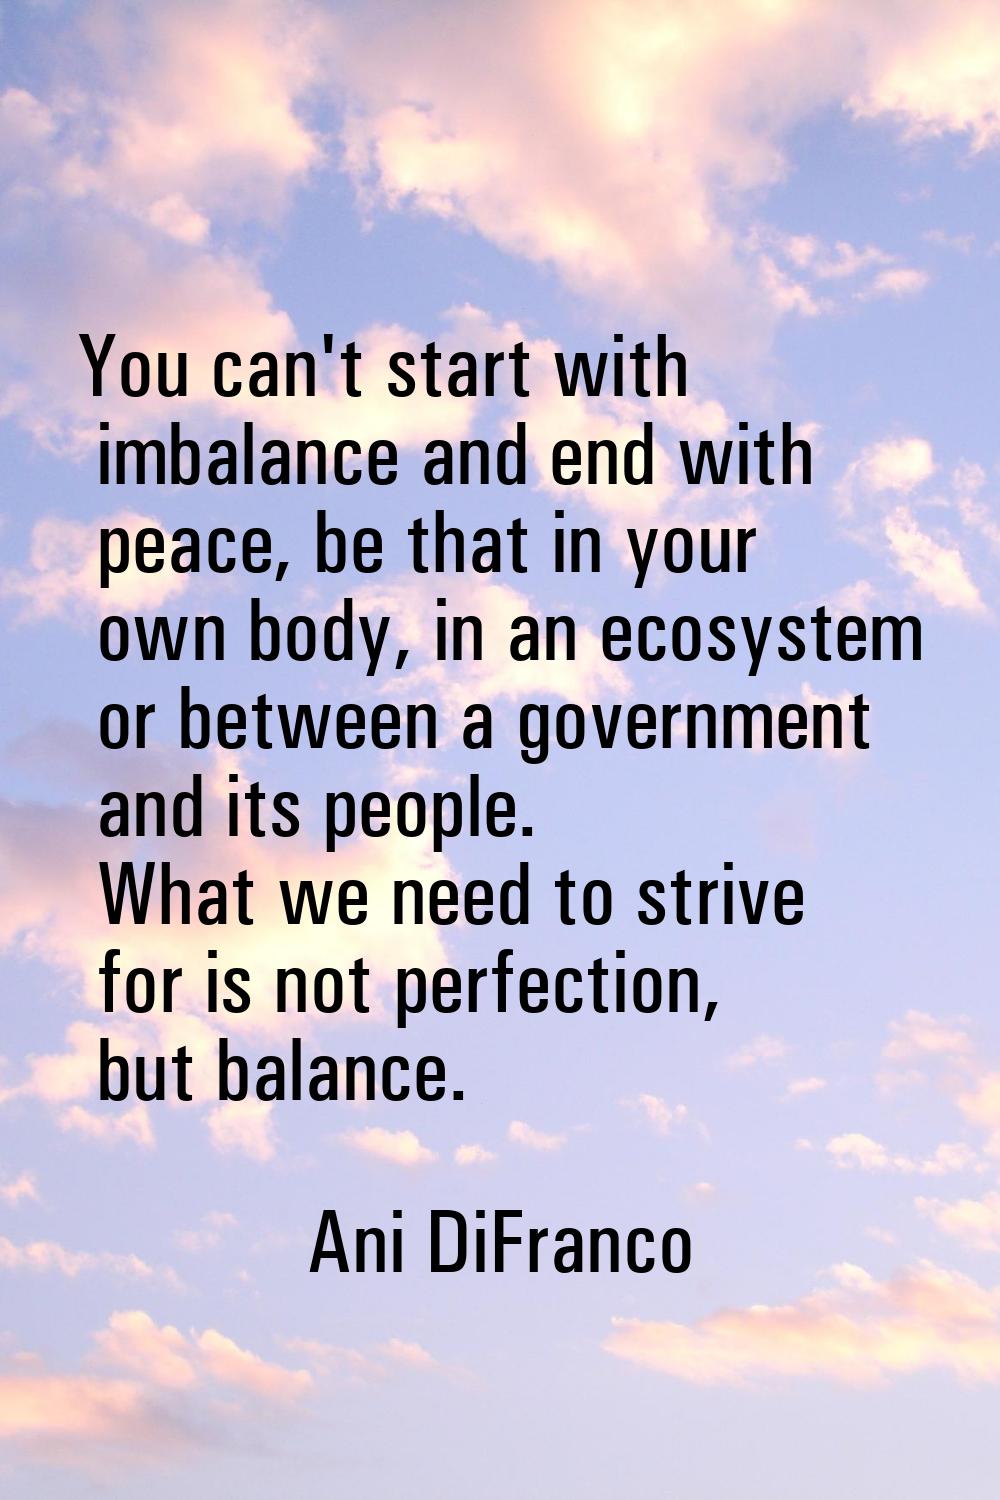 You can't start with imbalance and end with peace, be that in your own body, in an ecosystem or bet